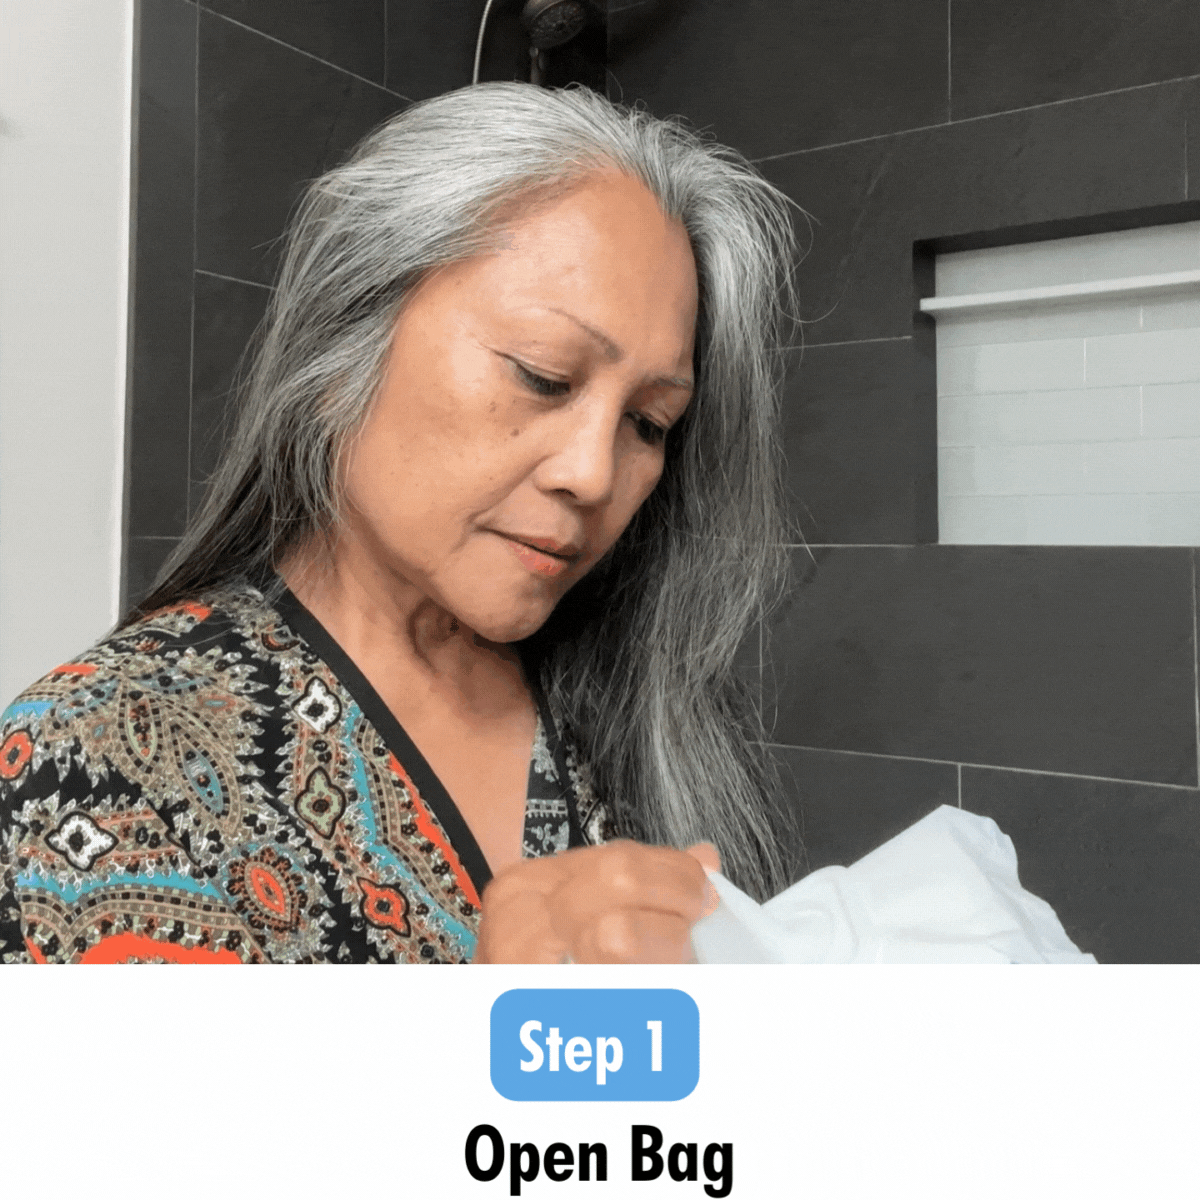 GIF of a woman efficiently opening a bag of Mirai Clinical deodorizing wipes infused with persimmon, illustrating Step 1 in the recommended usage process."  This ALT text provides a clear and concise description of the main subject, her action, the product's brand and its key feature, ensuring users get a clear idea of the GIF's content even if they can't visually experience it